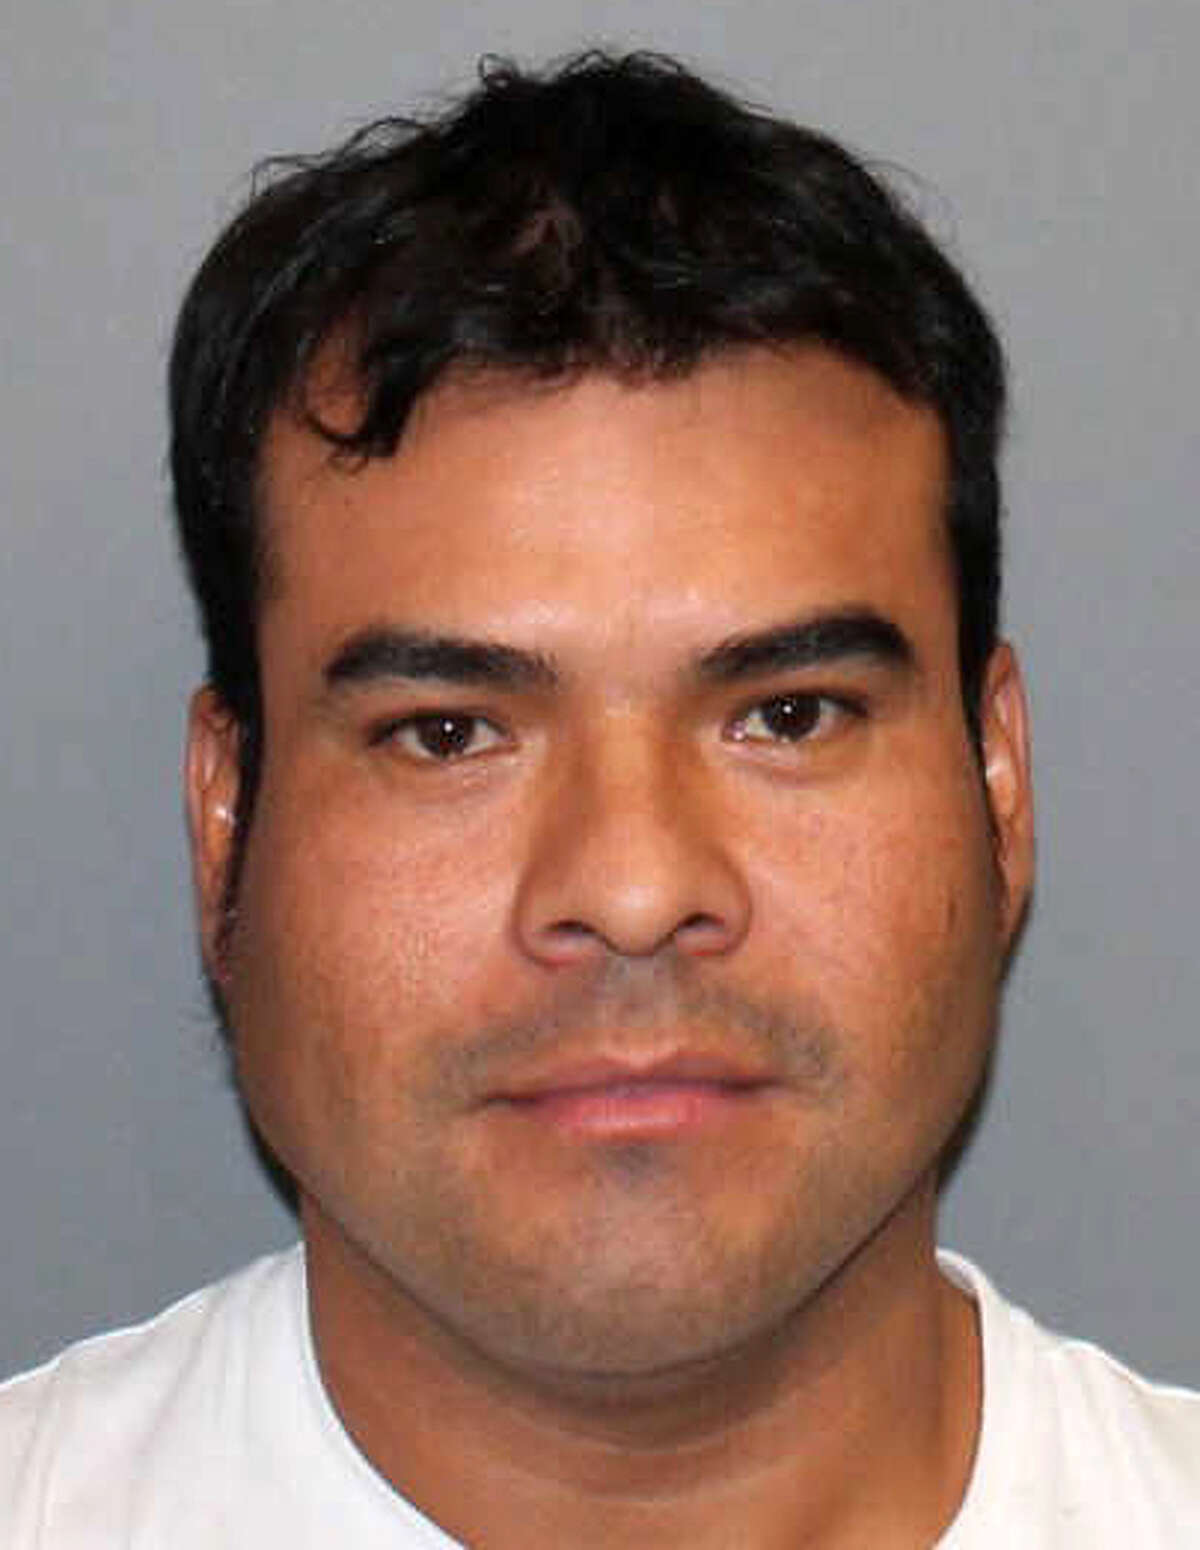 Ramiro Arcos-Garcia, a New Jersey man who confessed to fatally stabbing Jackson Pierre-Louis, a Bridgeport cab driver made his first appearance at the Stamford courthouse and was assigned a public defender on Tuesday, Dec. 30, 2014. Arcos-Garcia has not entered a plea in the case and was scheduled to return to court on January 15.